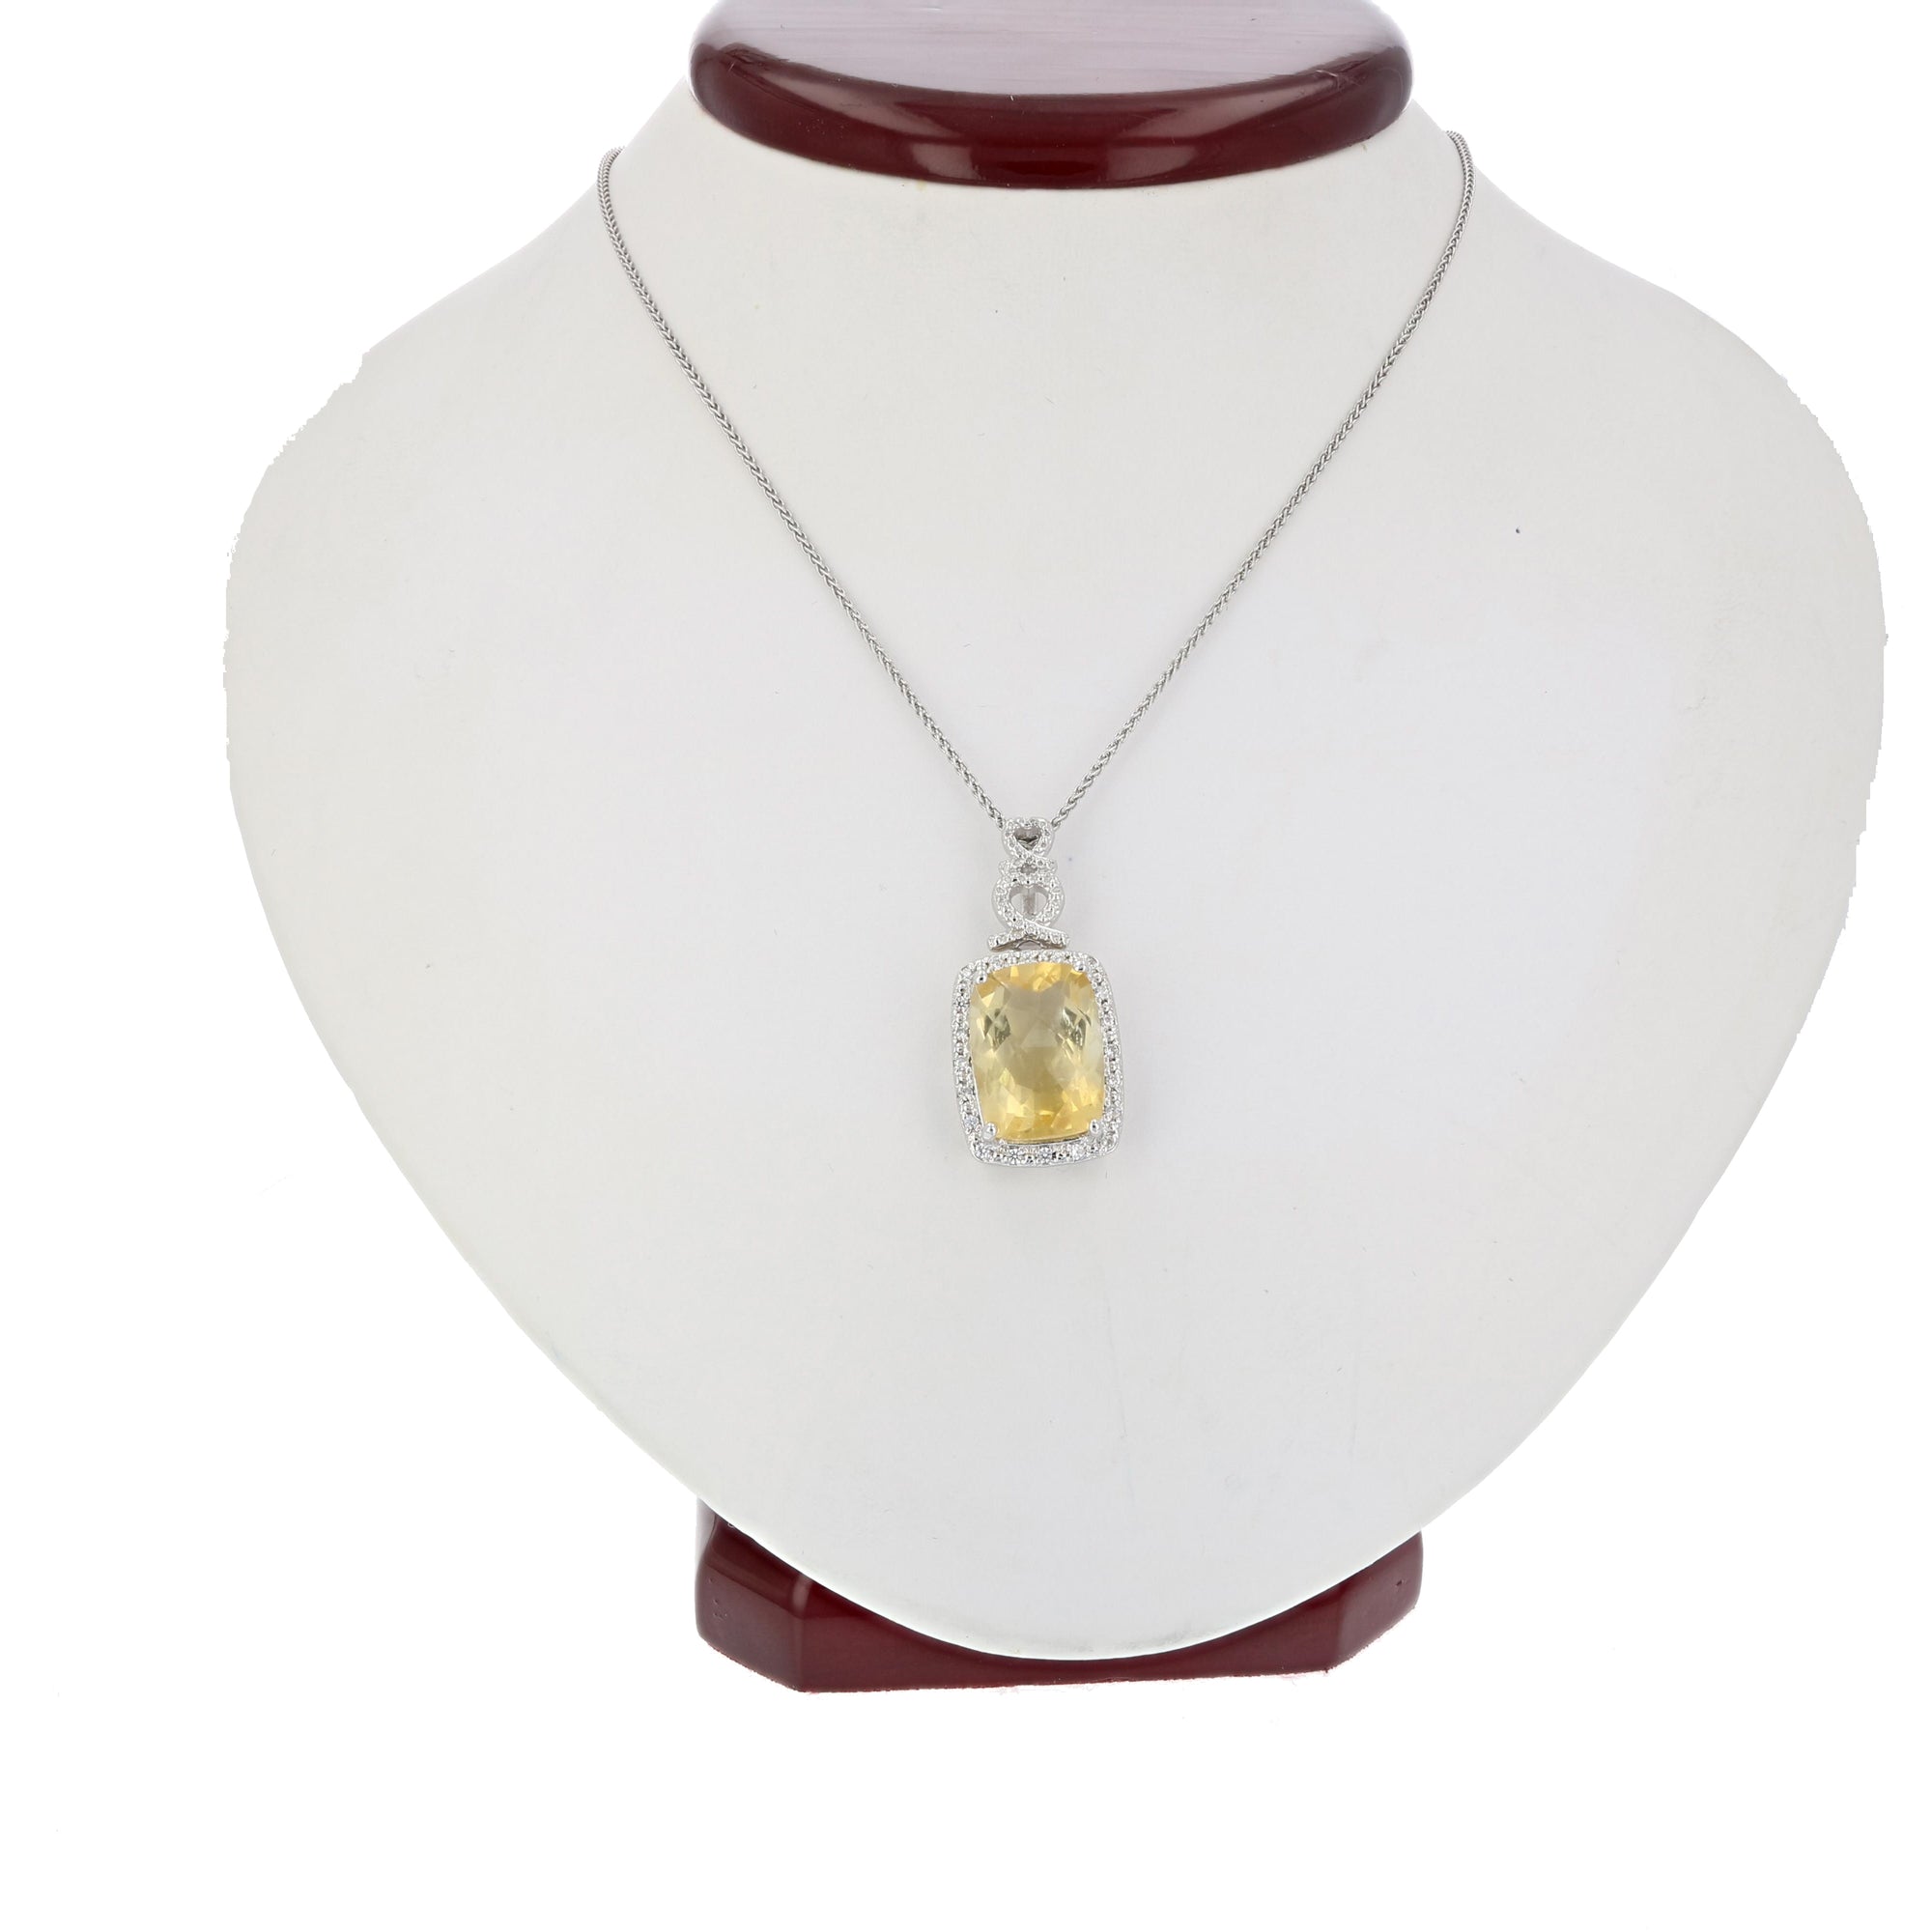 4.70 cttw Pendant Necklace, Citrine Cushion Cut Pendant Necklace for Women in .925 Sterling Silver with Rhodium, 18 Inch Chain, Prong Setting